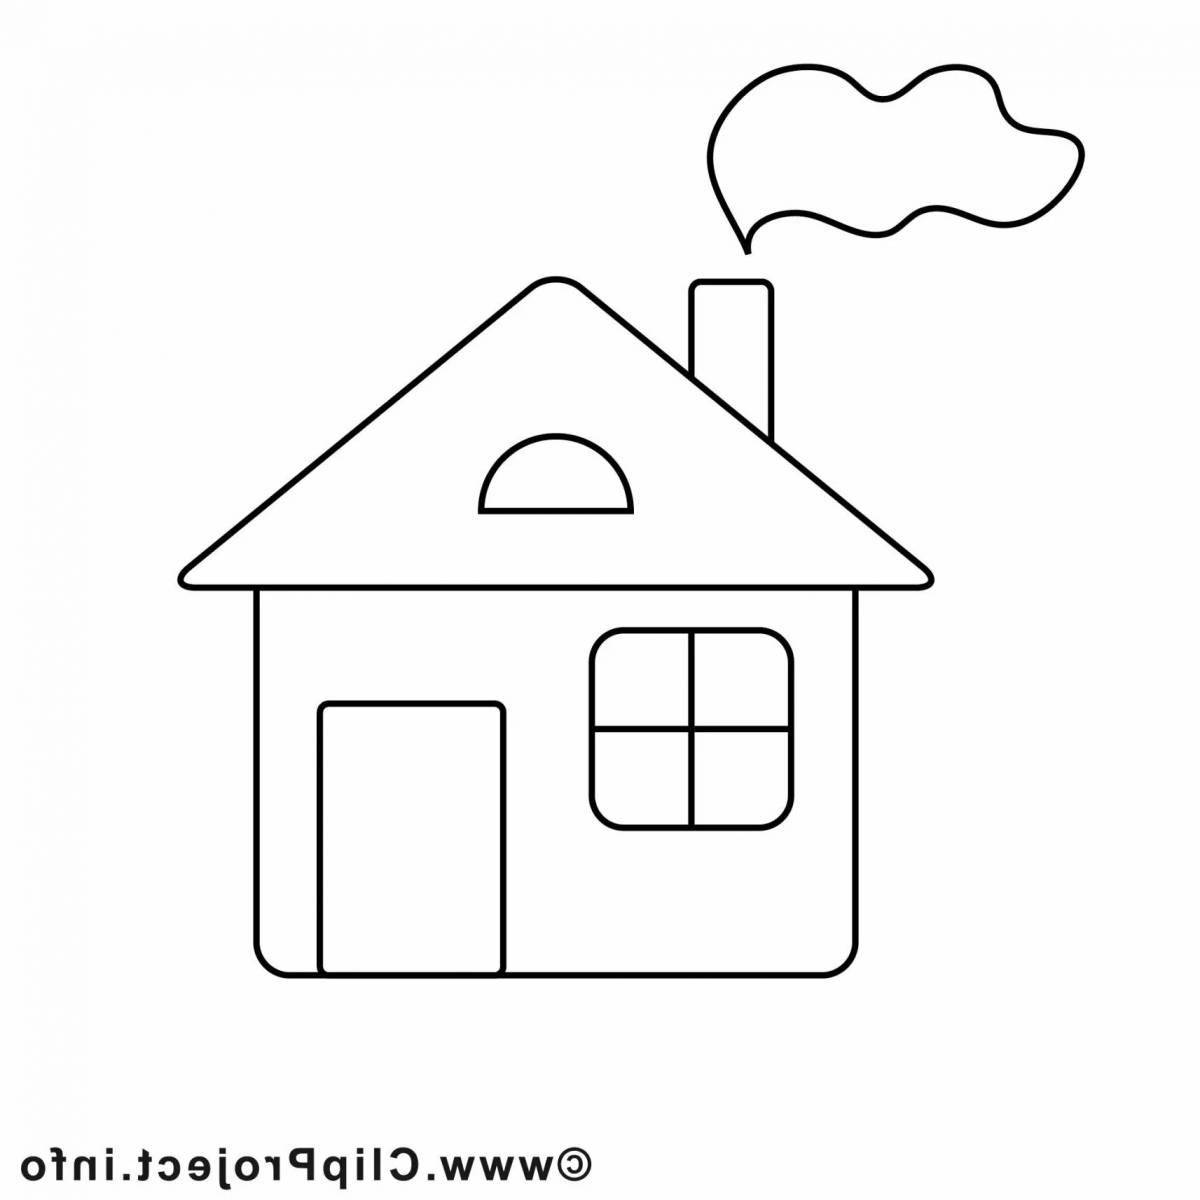 Animated drawing of a house